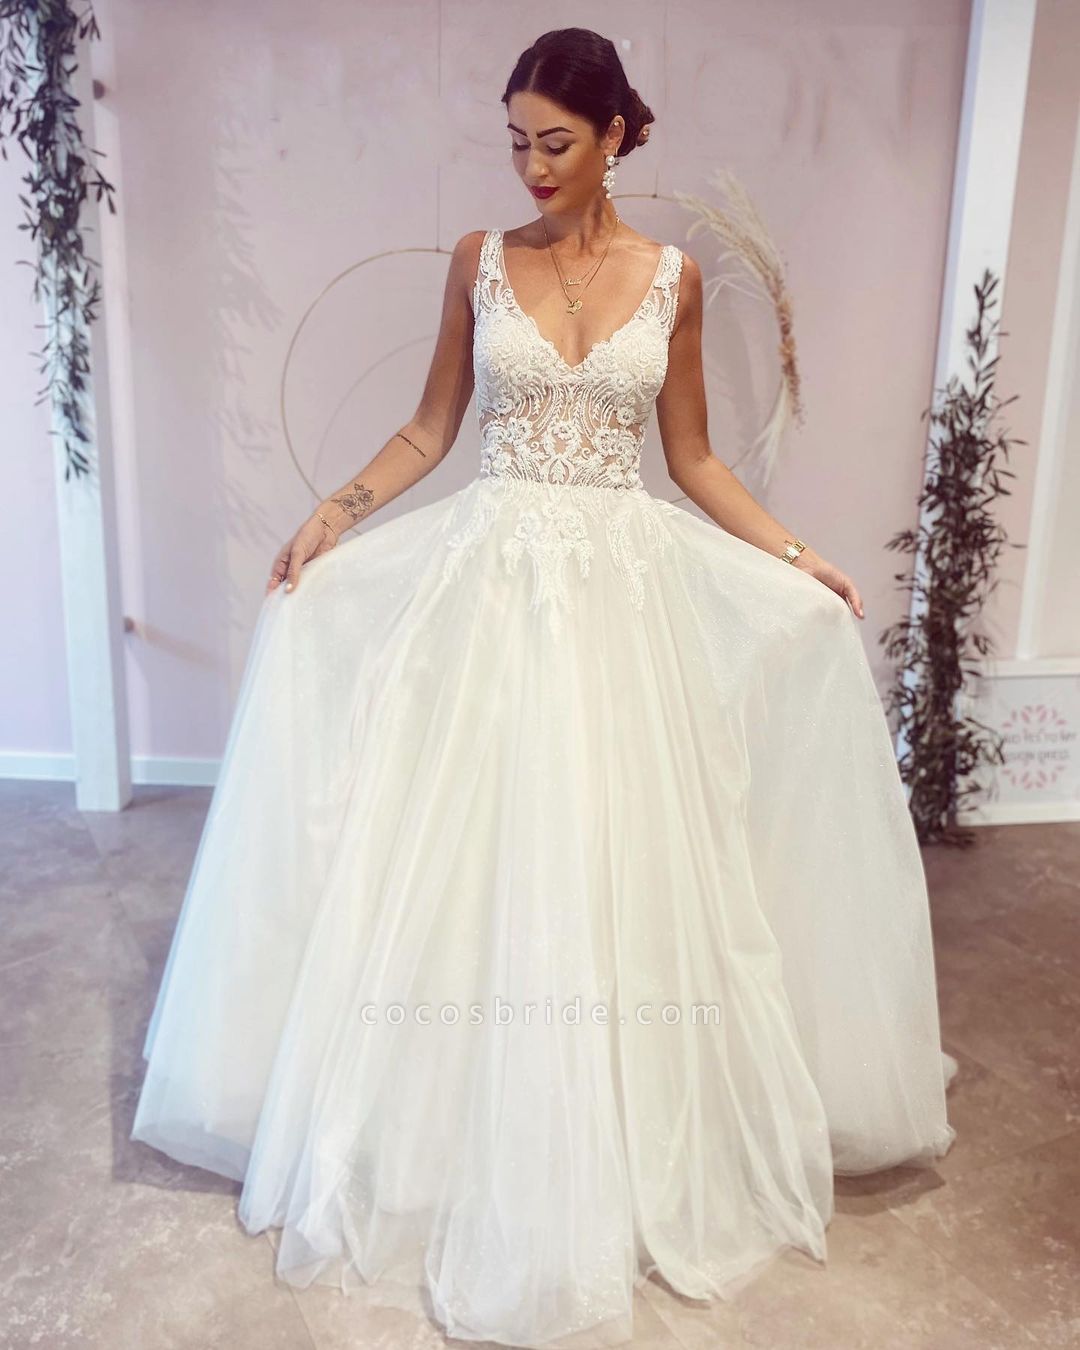 Stunning A-Line Deep V-neck Backless Wedding Dress With Appliques Lace